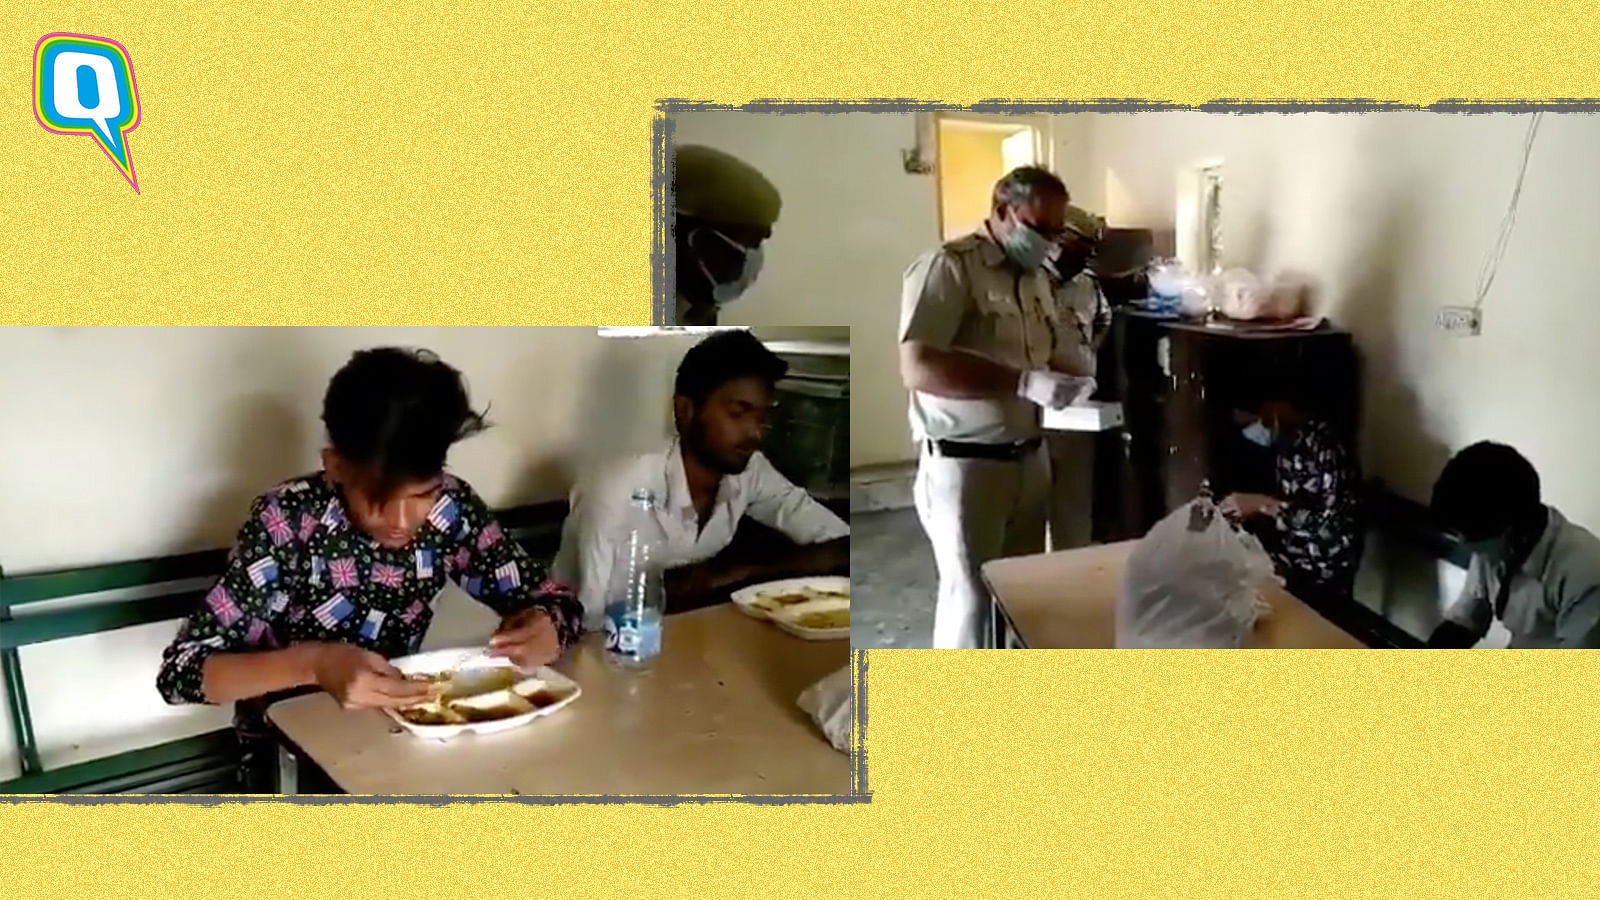 Delhi Police provides food to daily wage labourers